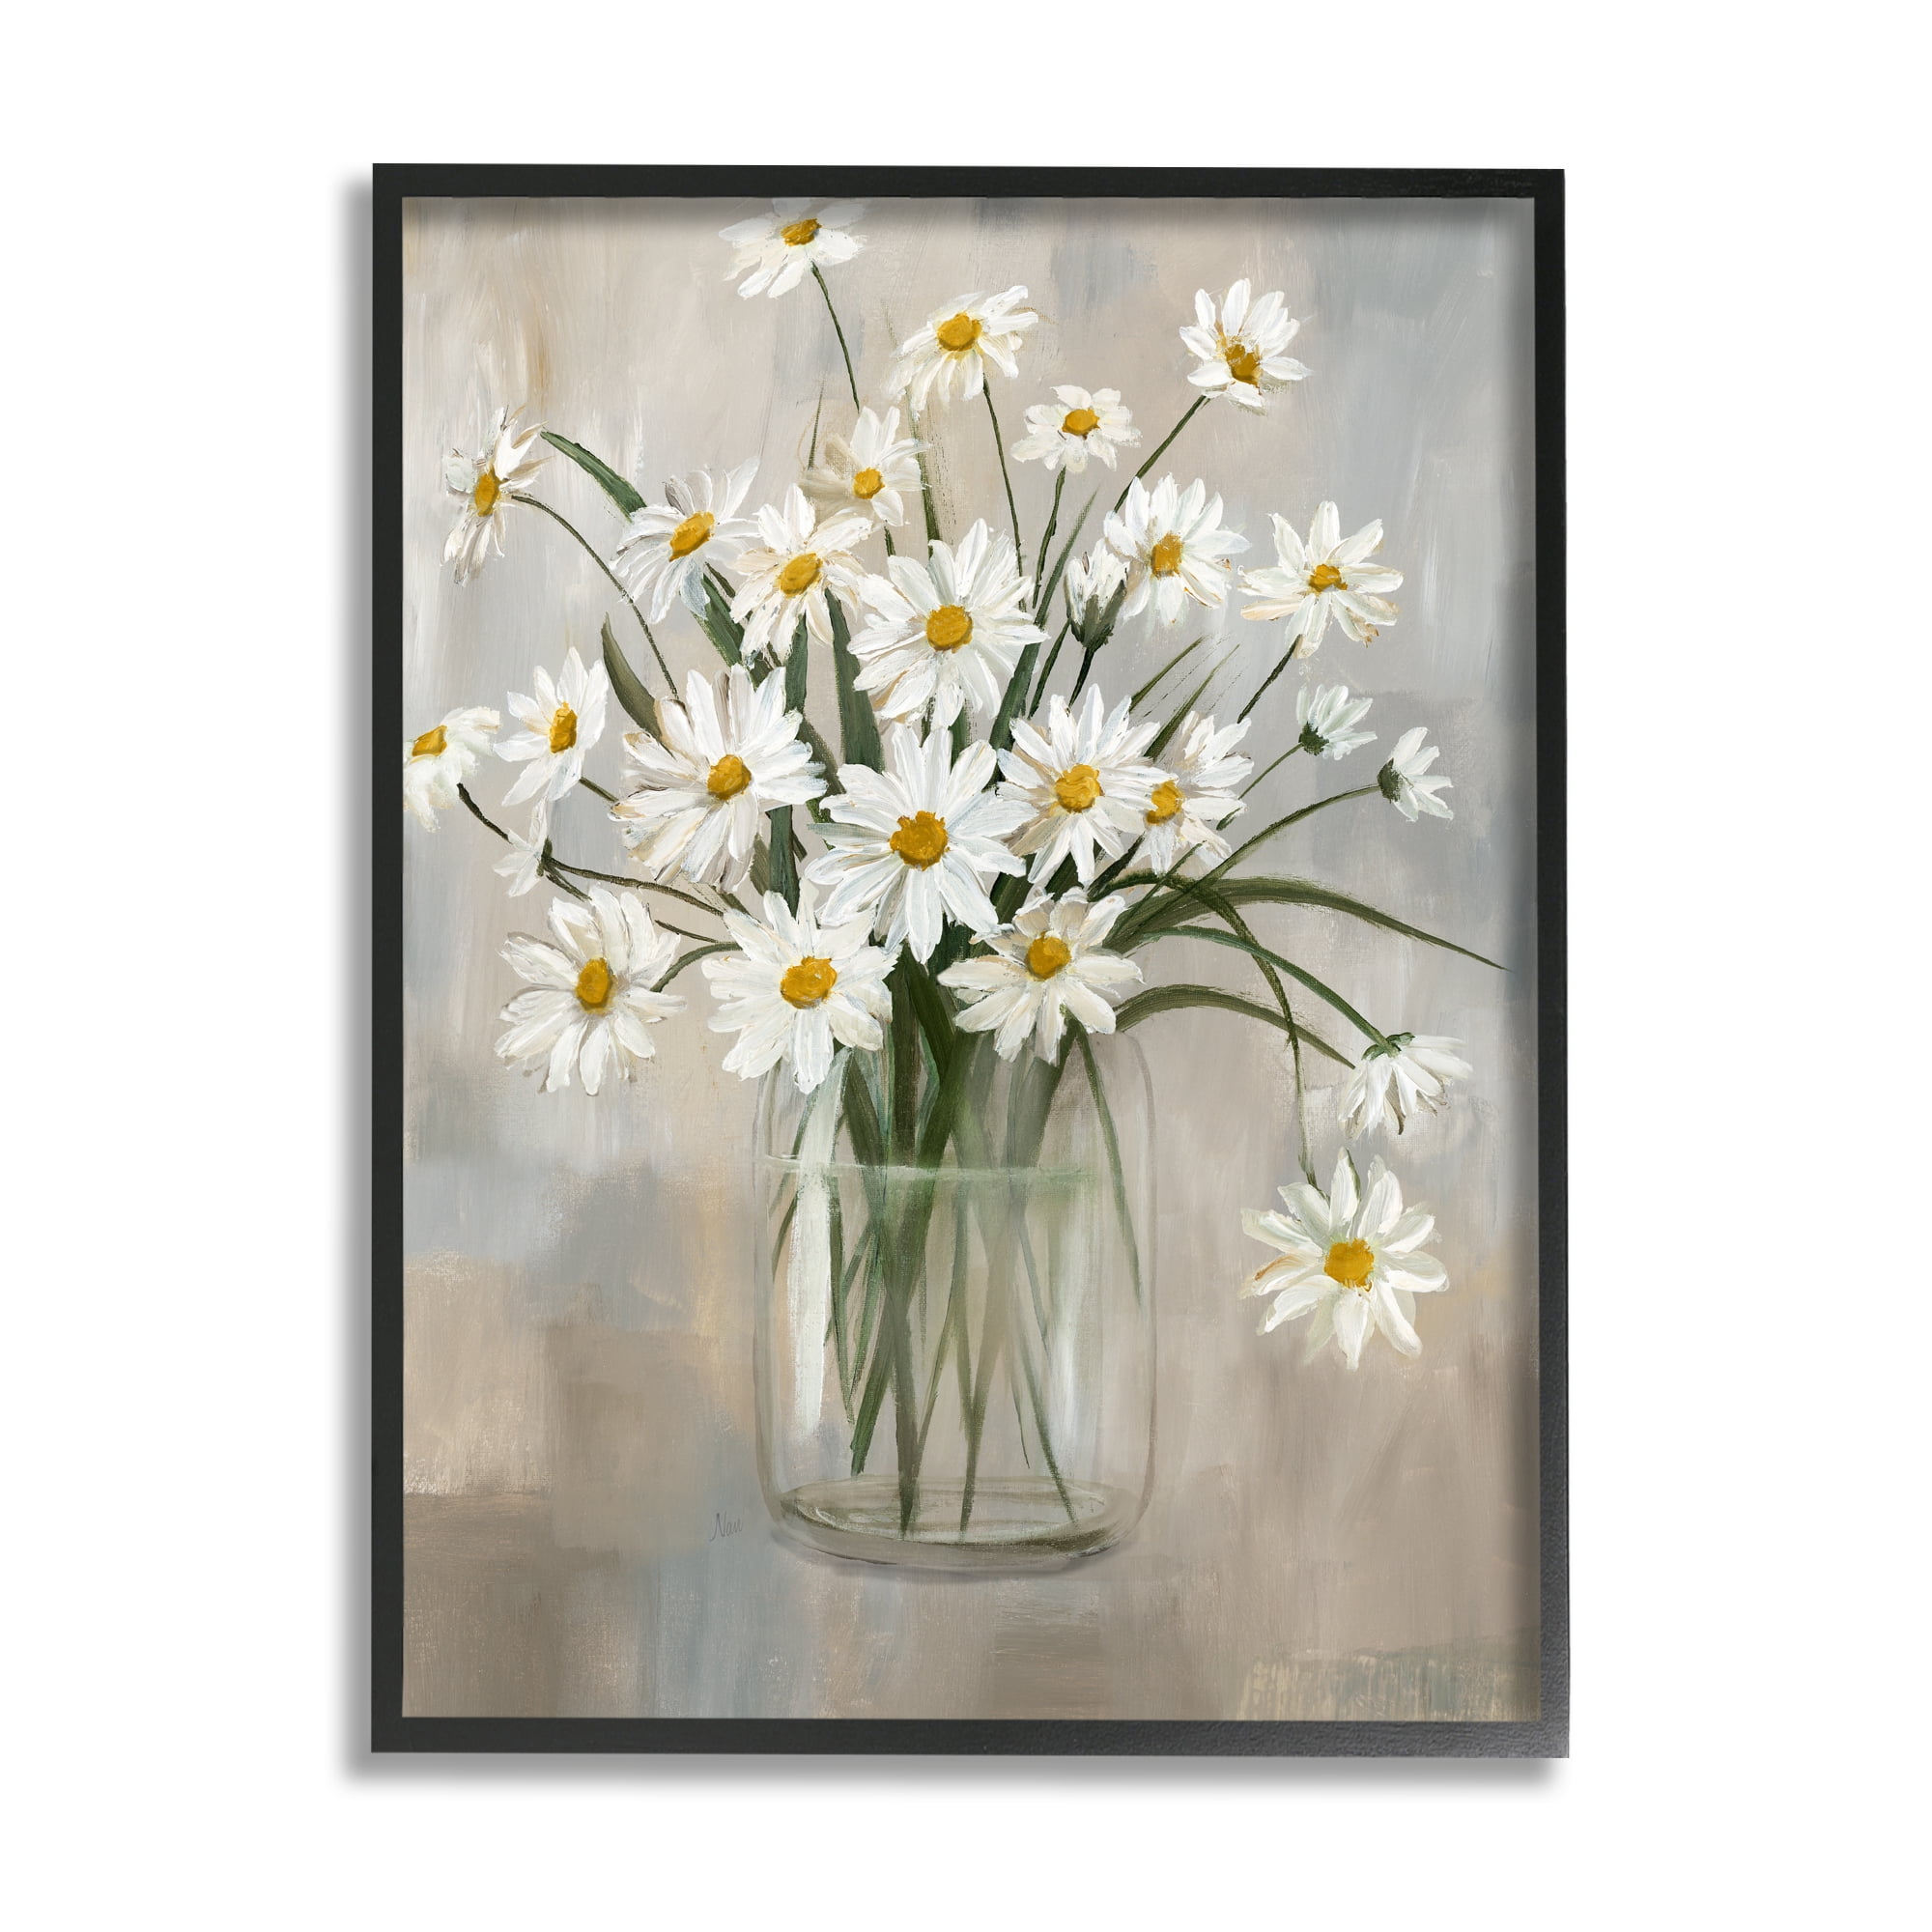 Brown Blue Rustic Farmhouse Daisy Flower Home Decor Wall Art Matted Picture 